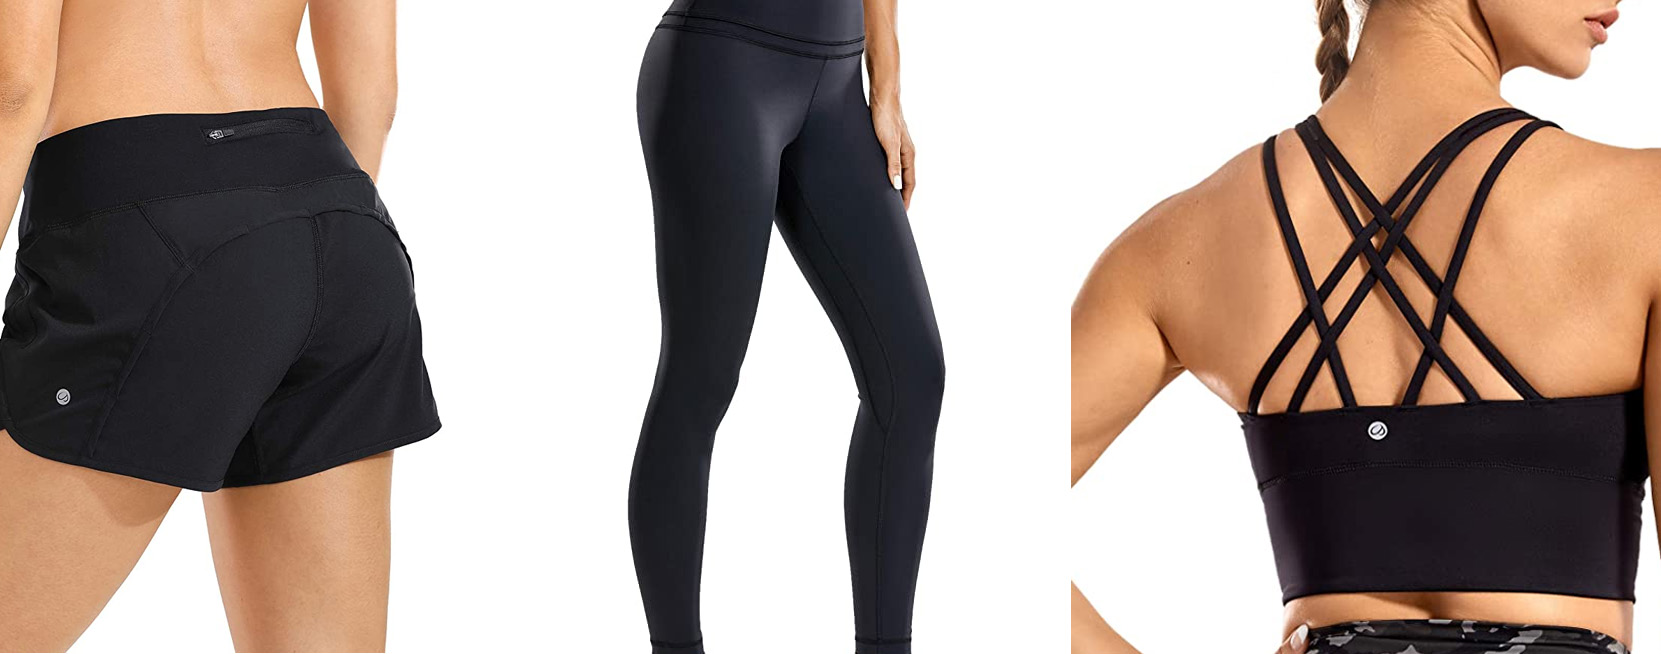 s offering Lululemon look-alike apparel from $13 Prime shipped